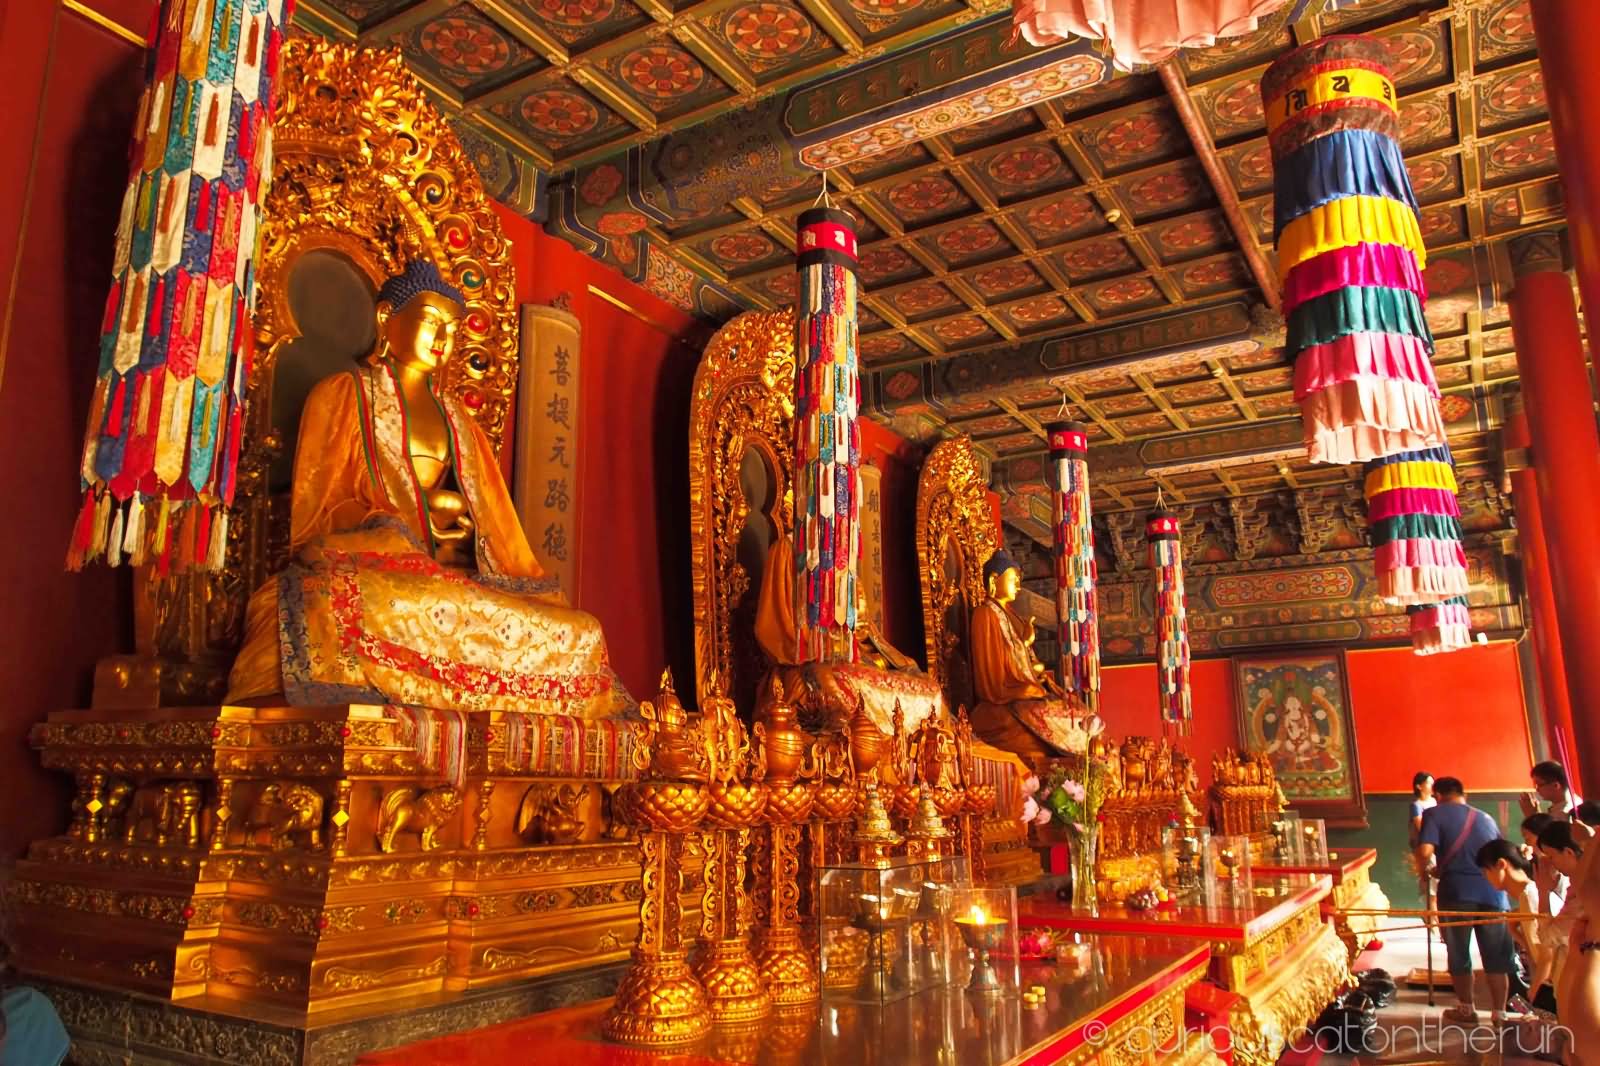 Inside View Of The Yonghe Temple, Beijing